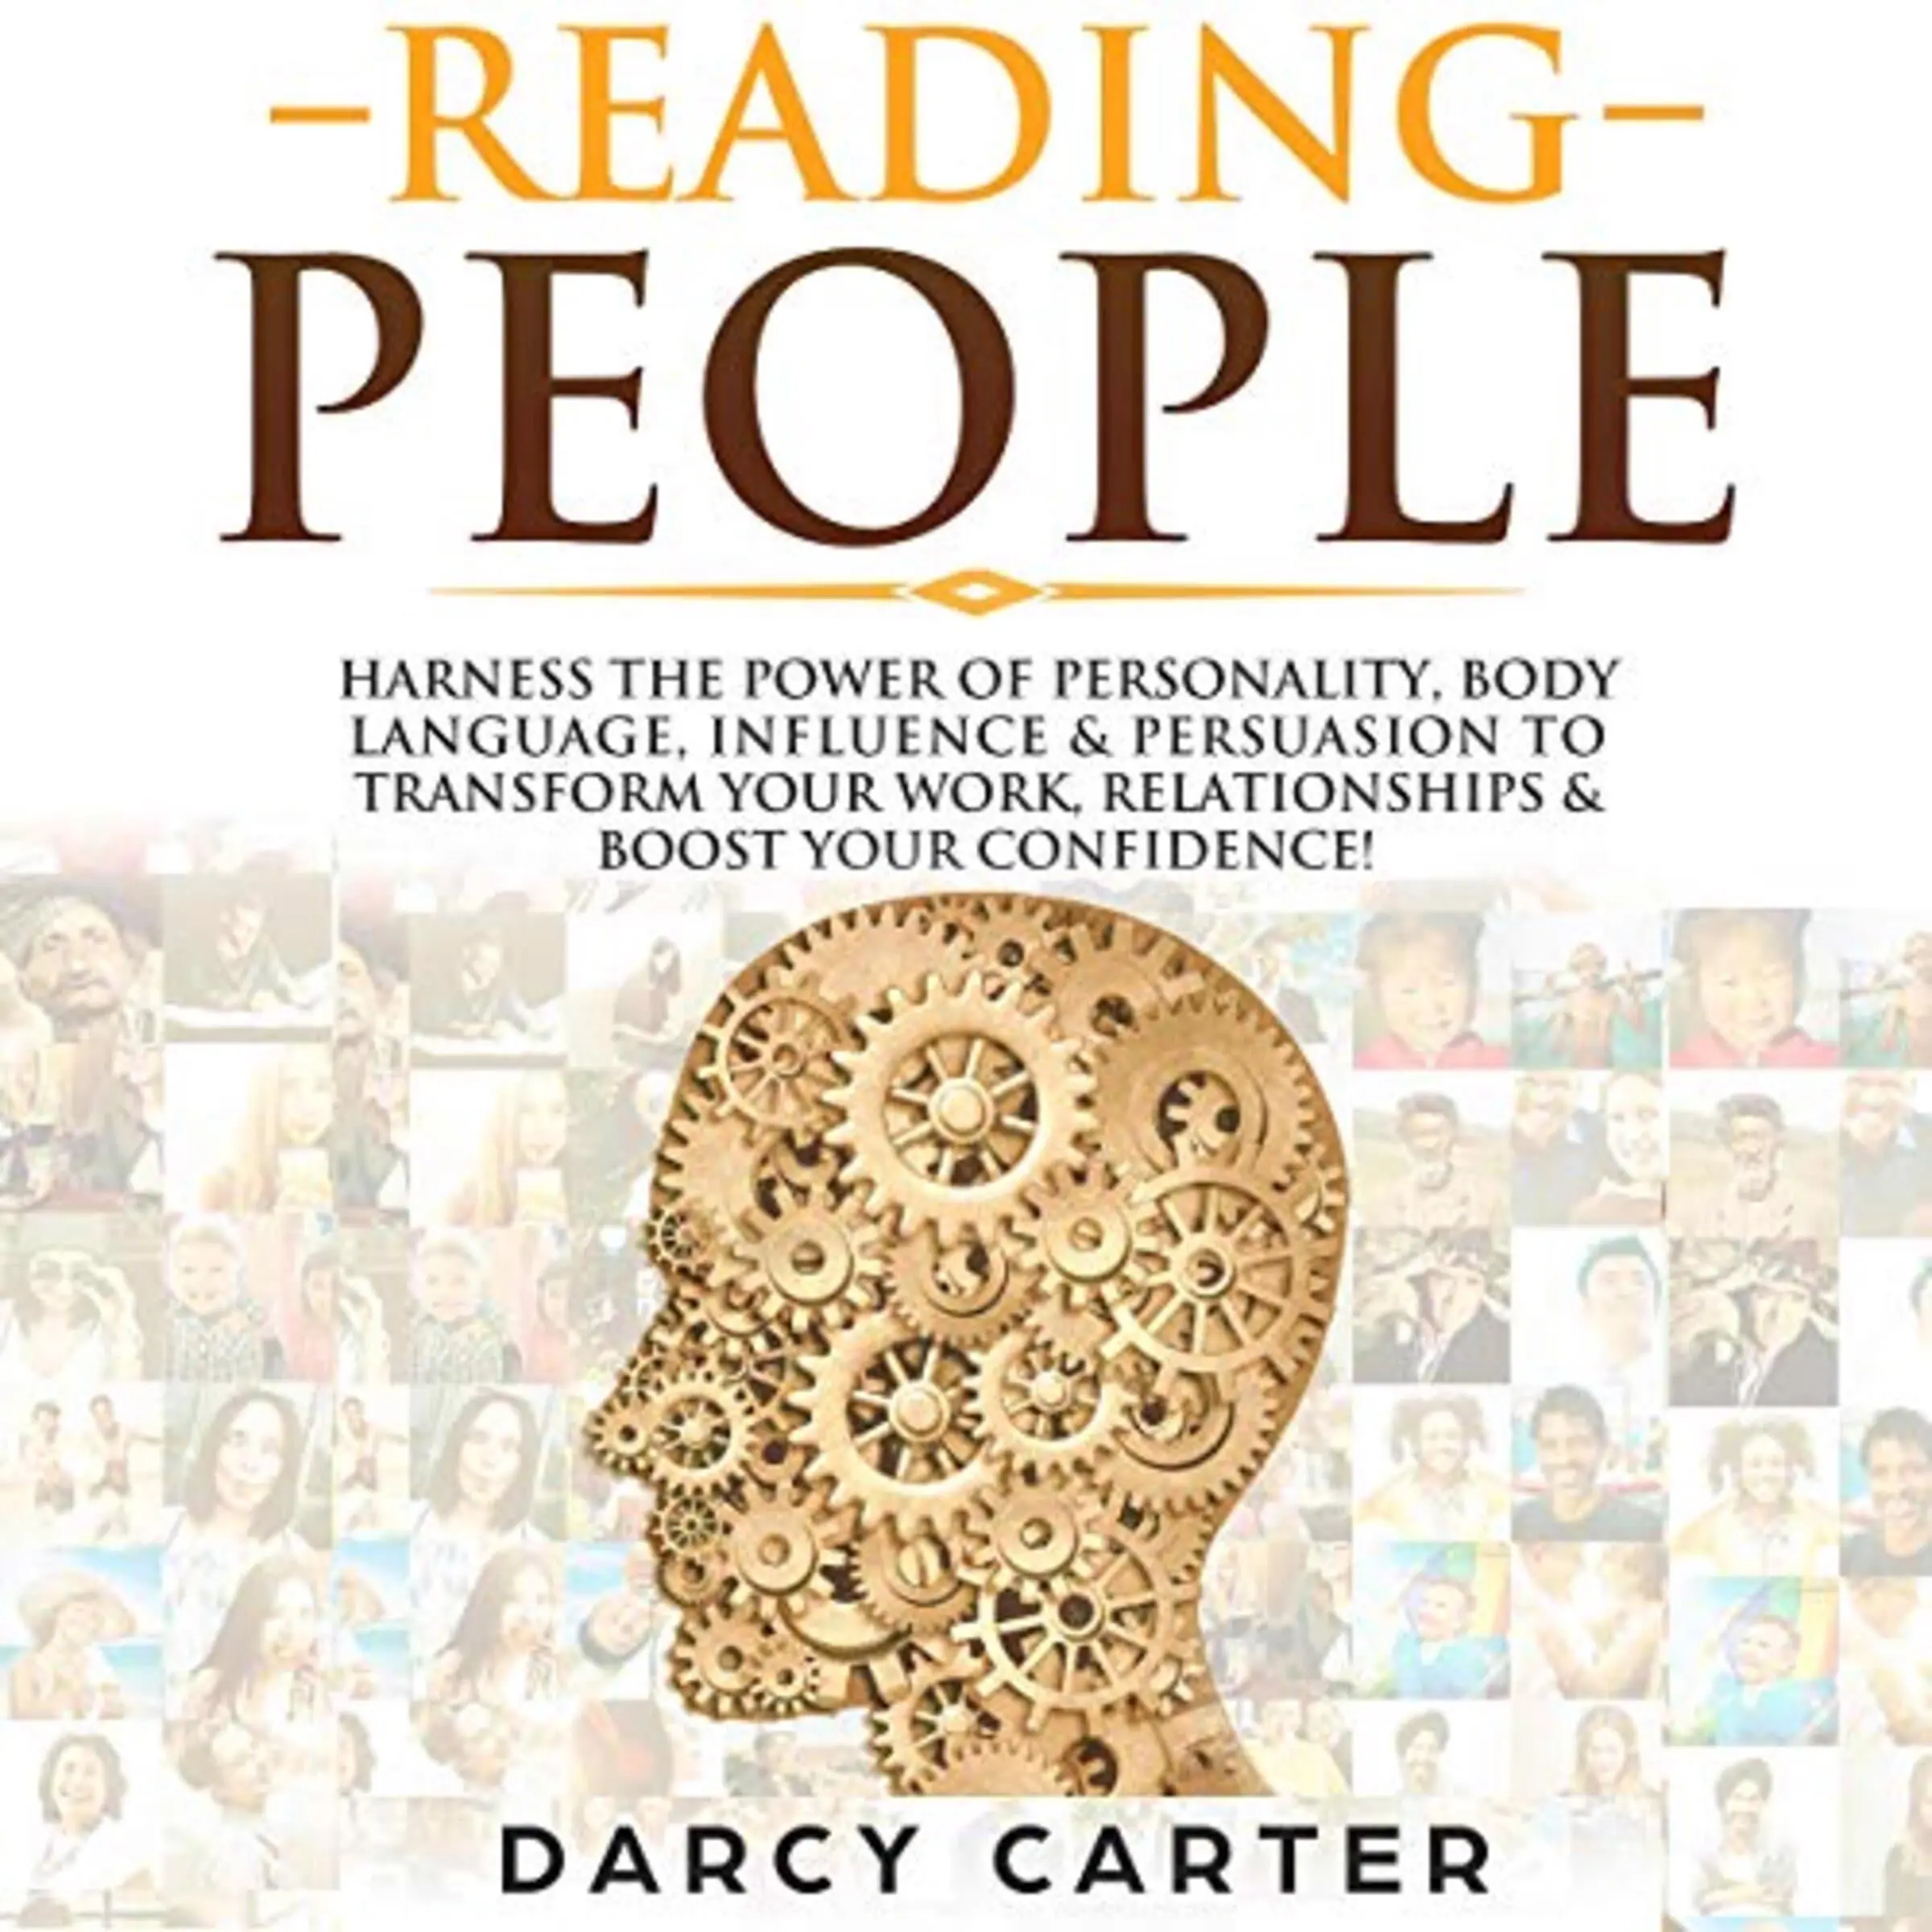 Reading People by Darcy Carter Audiobook